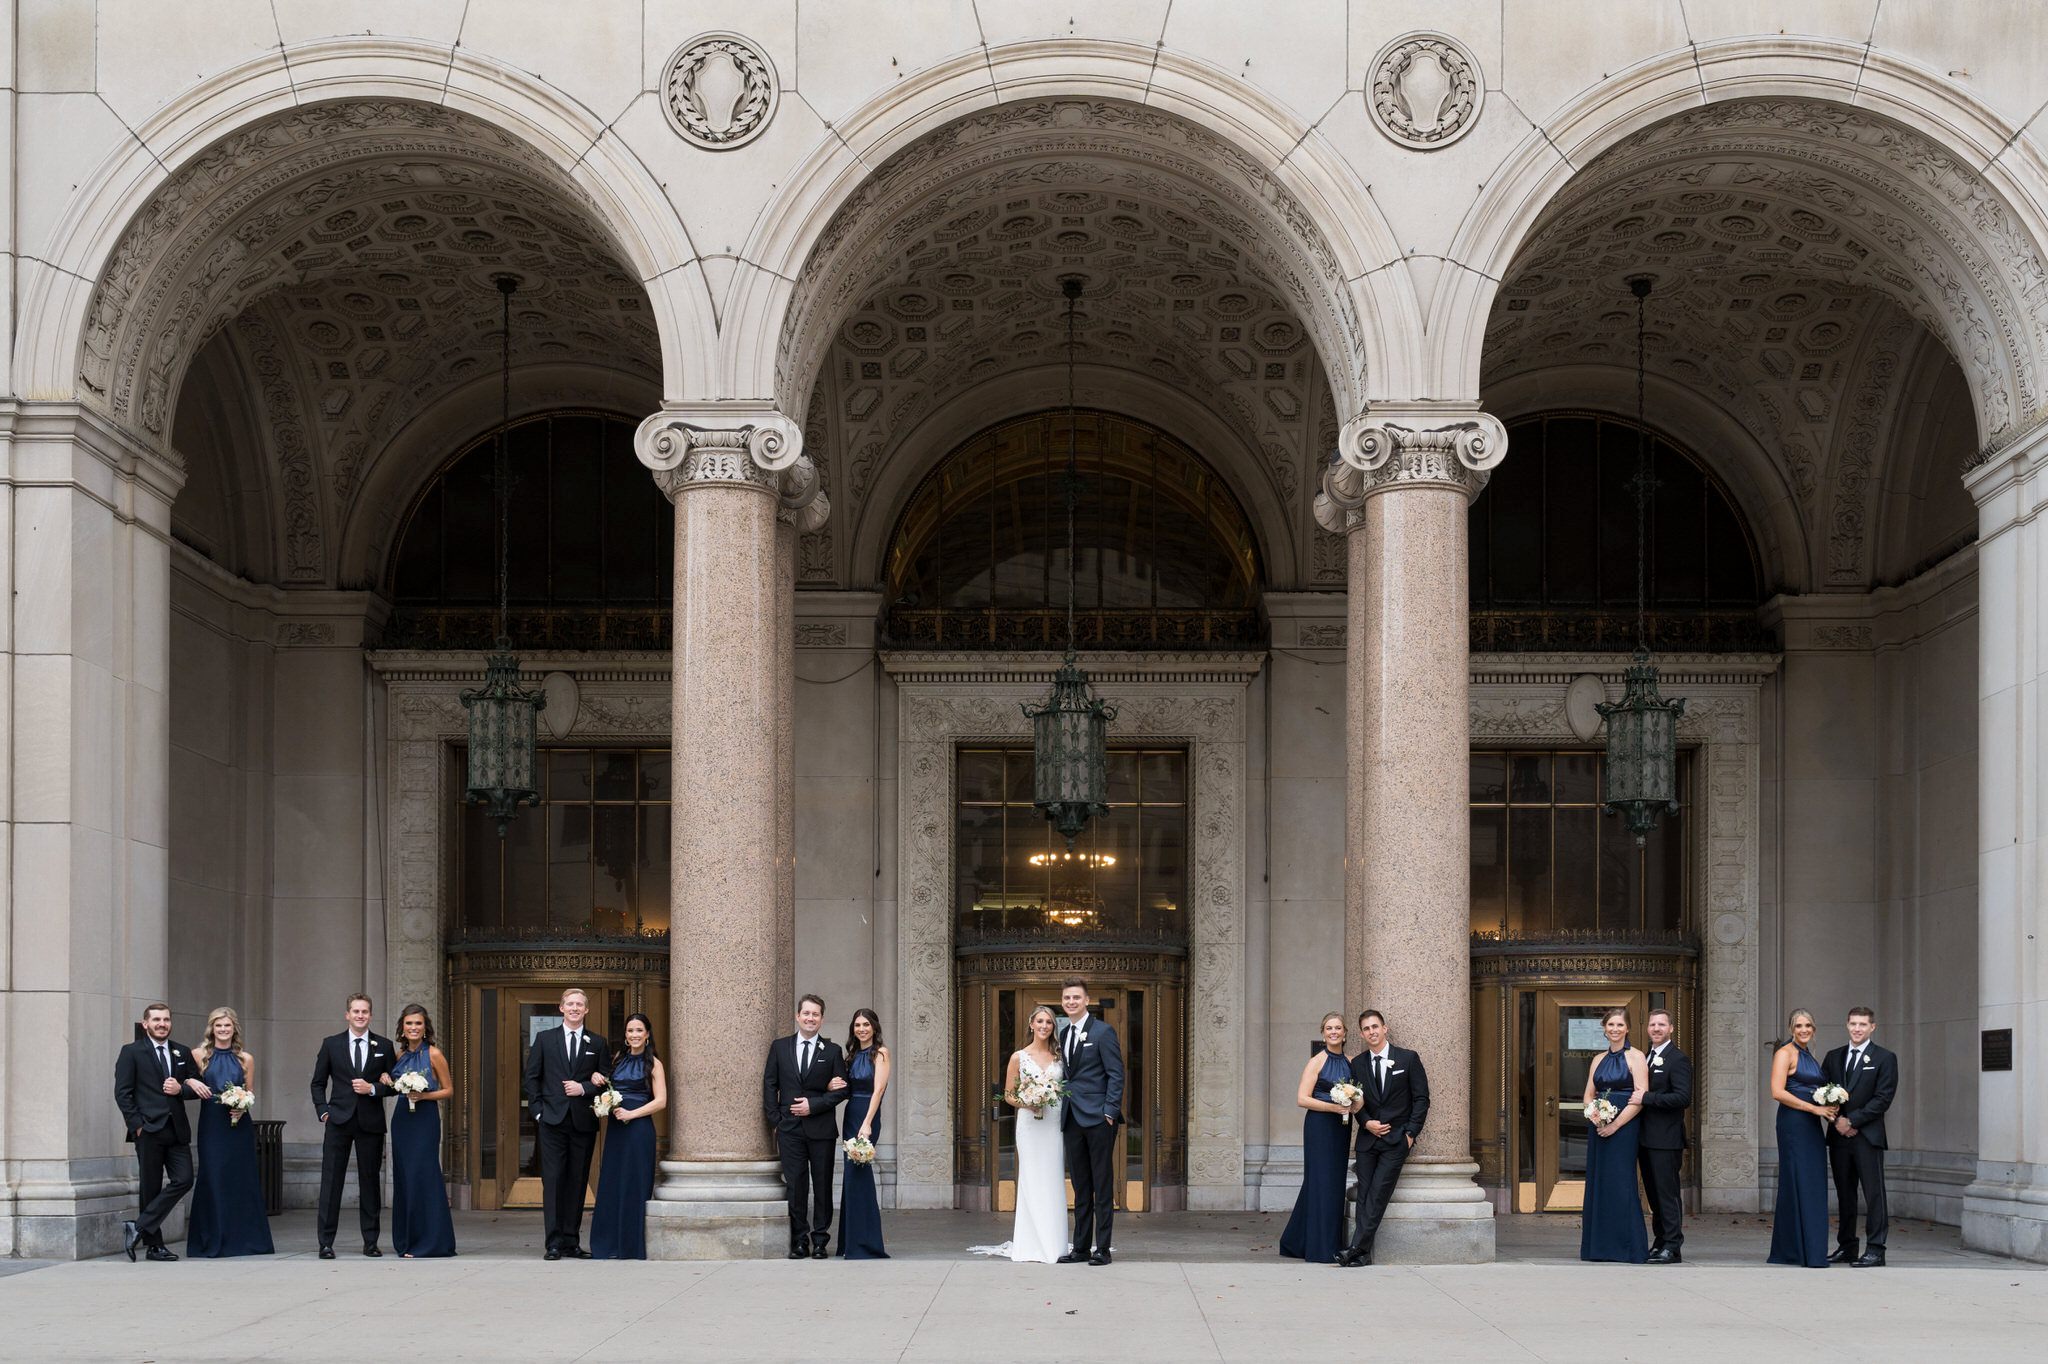 A bridal party poses in front of three giant arches at the Cadillac Place apartments in Detroit, MI.   